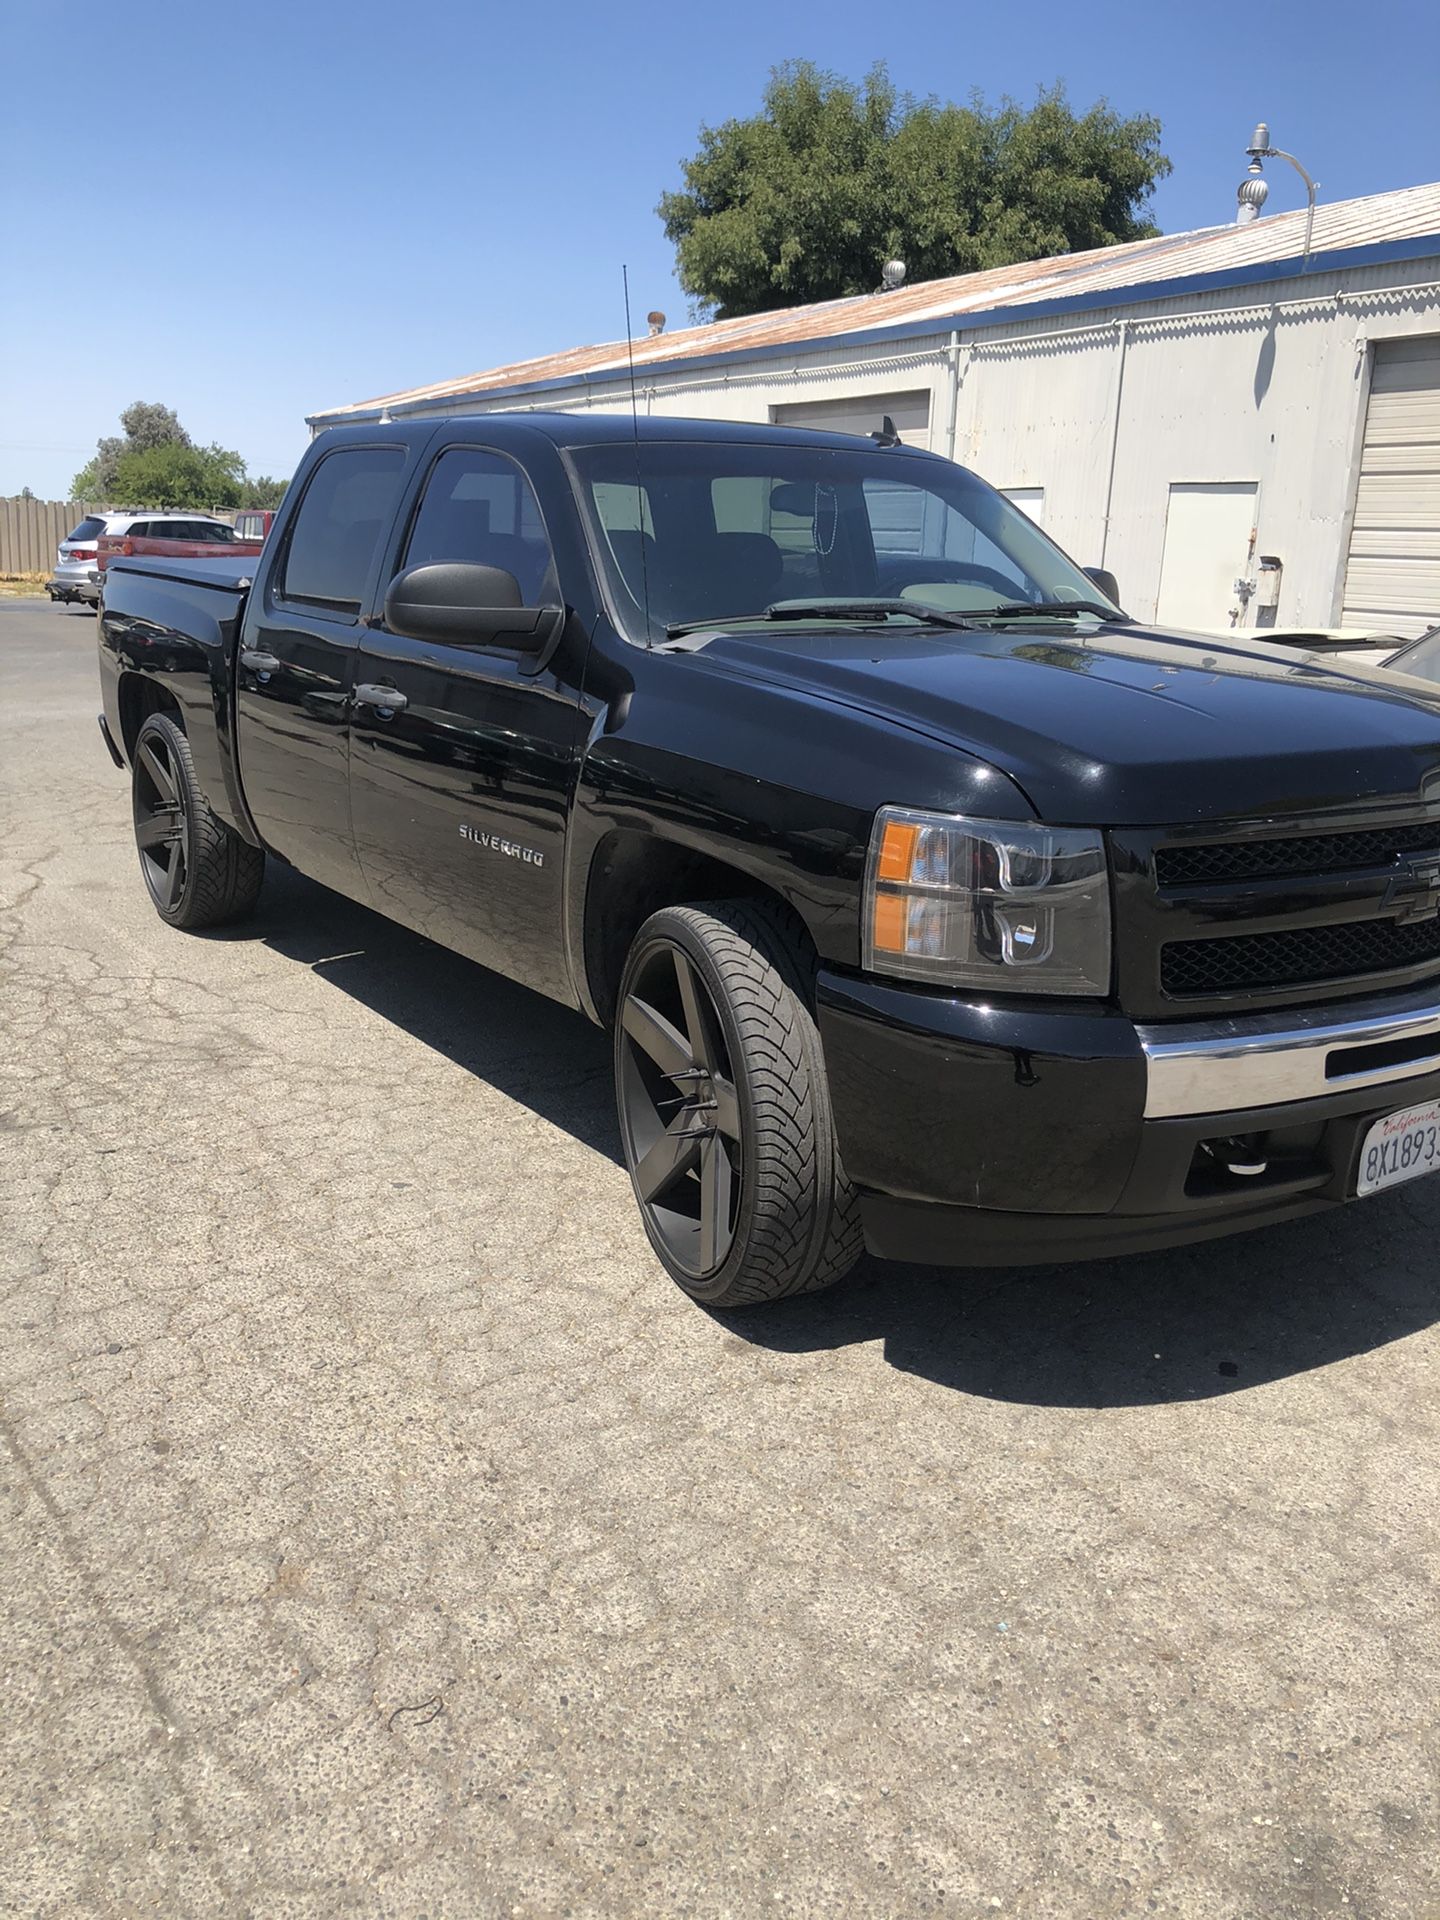 12,000 2011 Chevy Silverado 19100000 original miles with clean title 22” dubs baller rims tag up to date